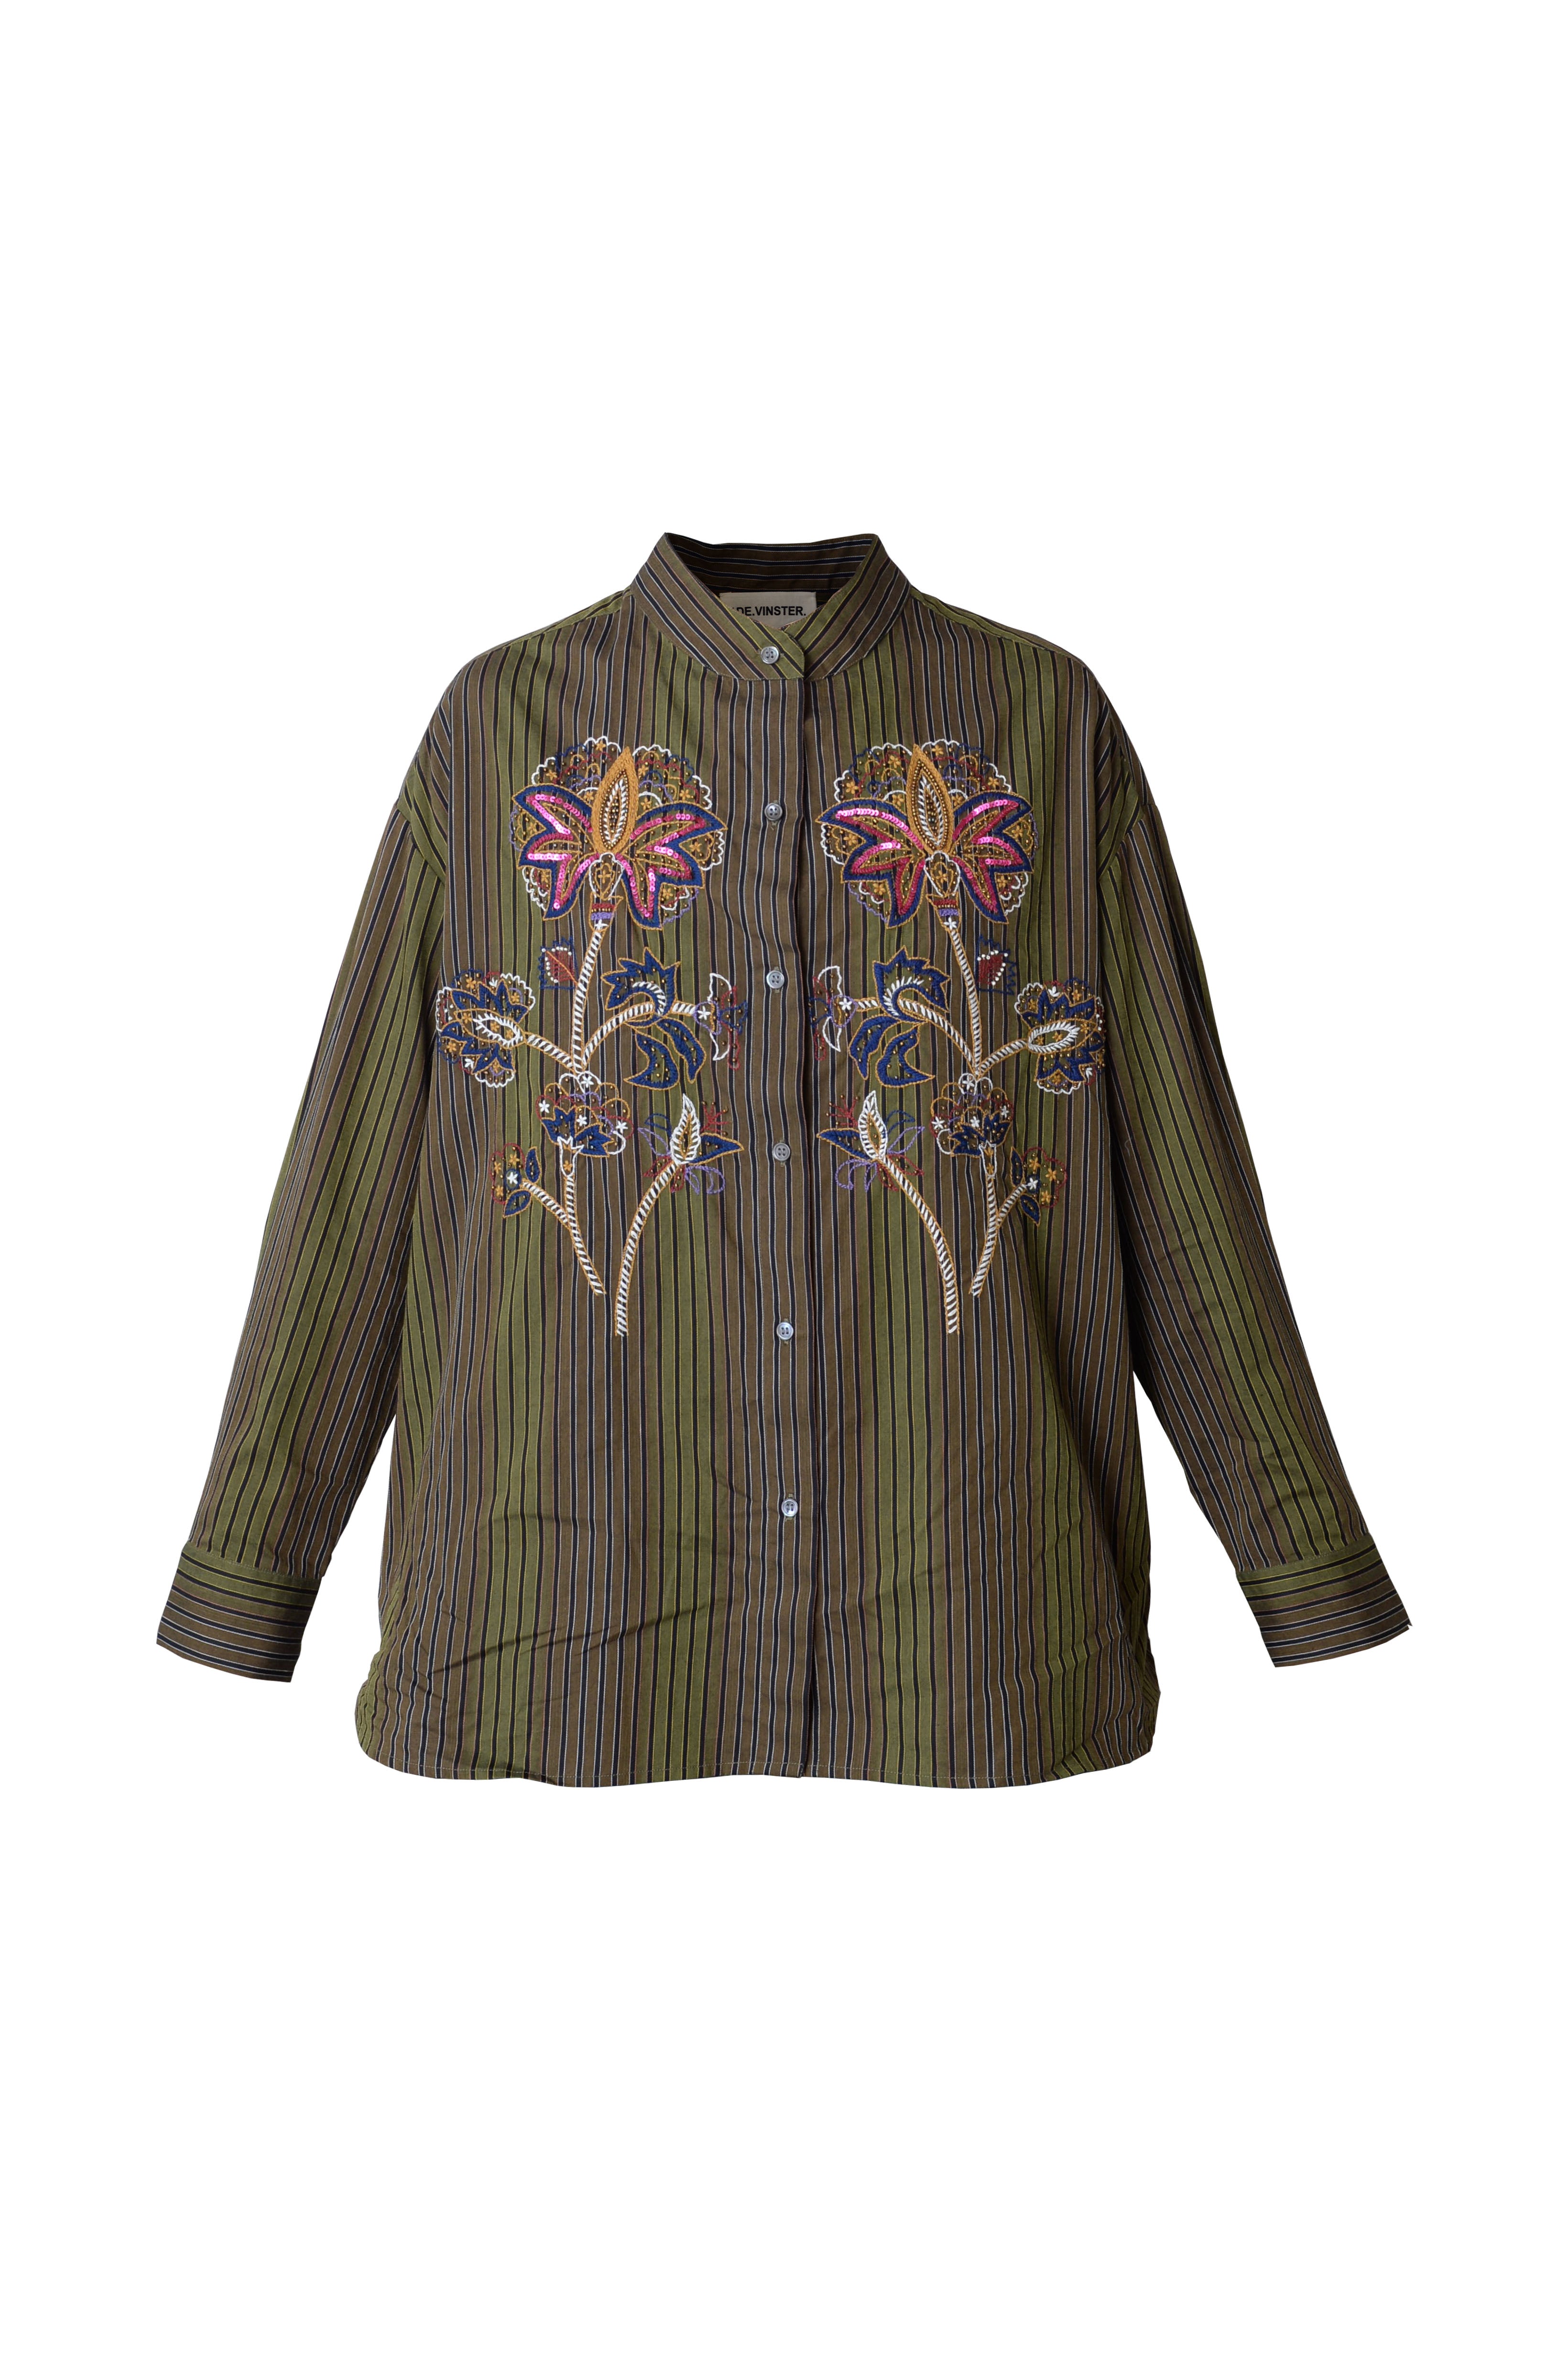 Billie khaki striped blouse with embroidered flowers